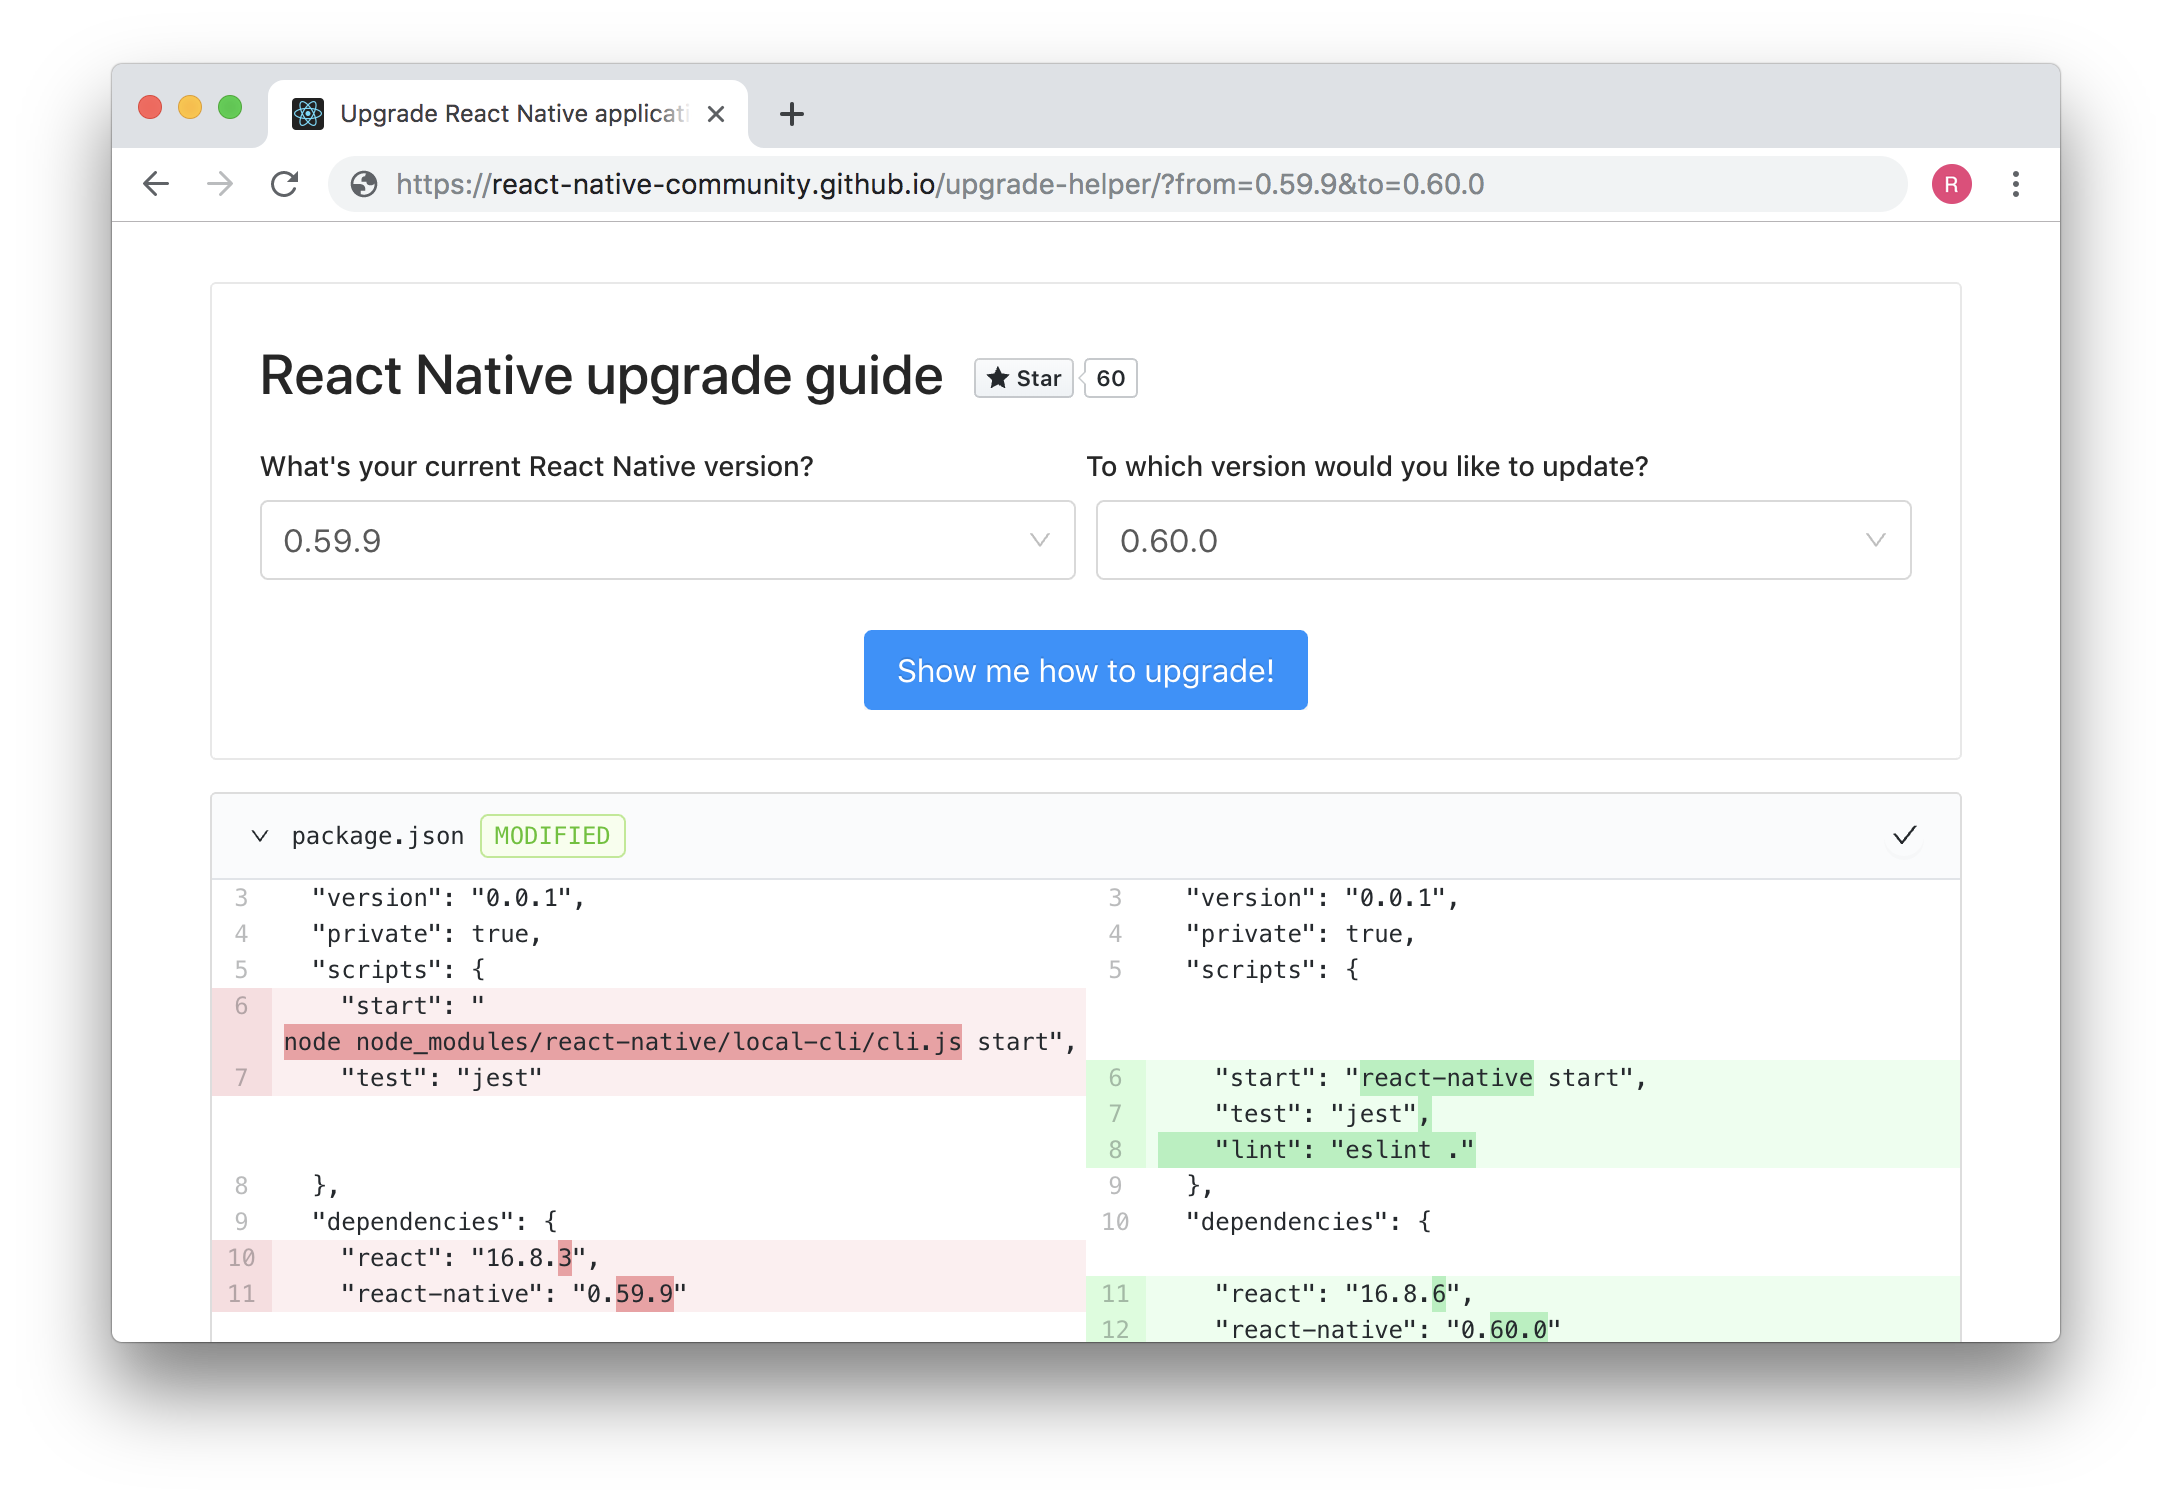 Upgrade Helper cleanly and easily shows the changes needed to migrate to a different version of React Native